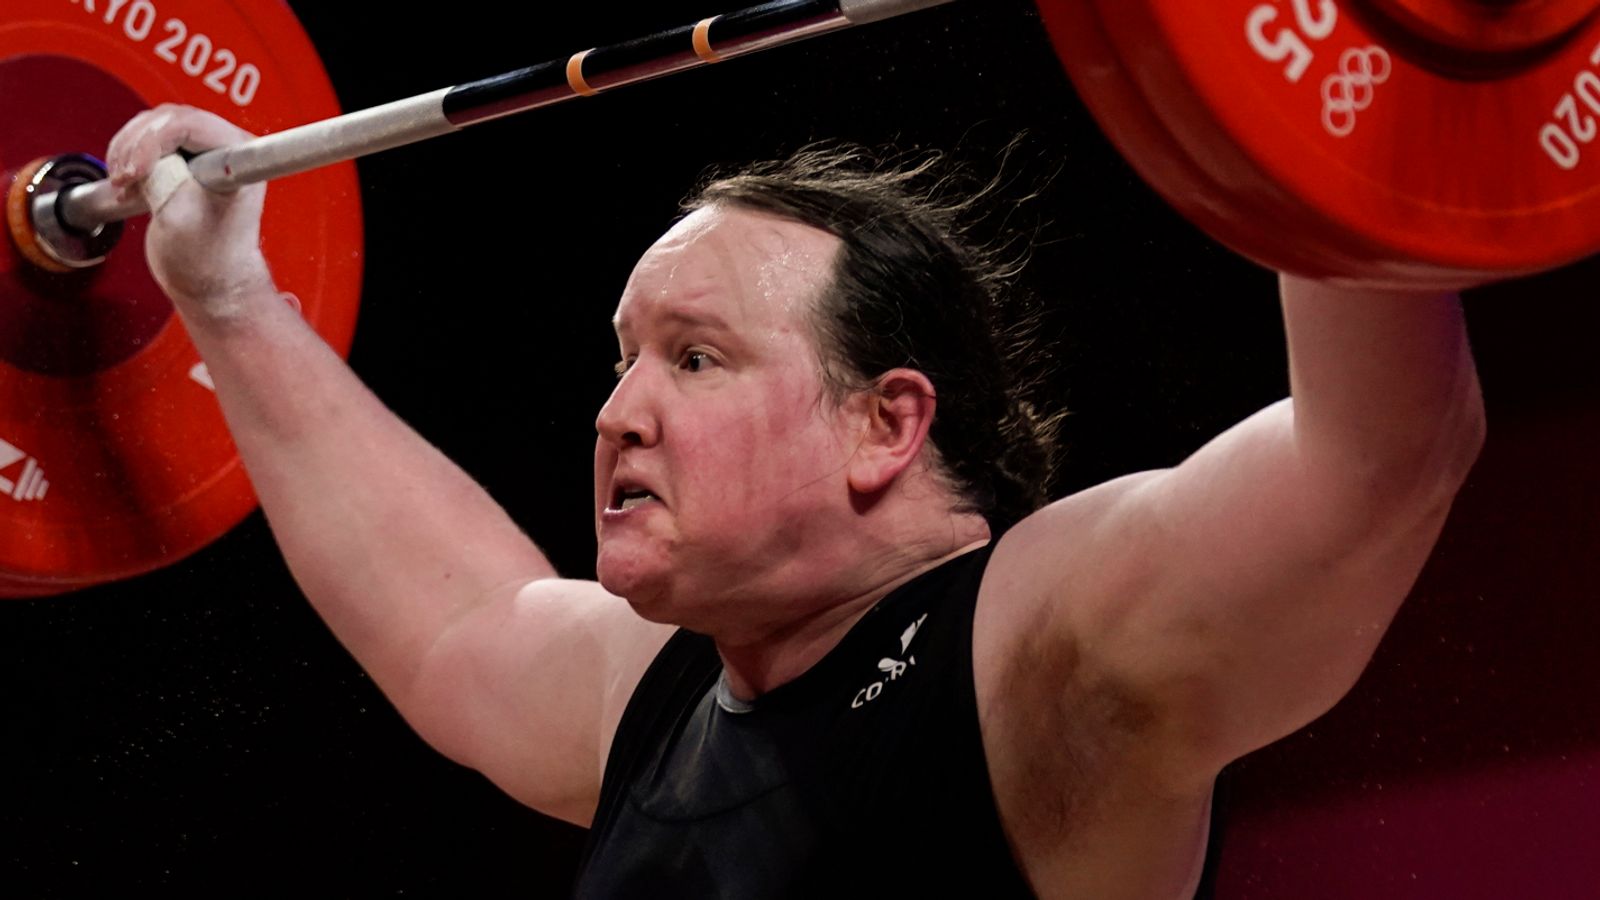 Laurel Hubbard Transgender Weightlifter Out Of Olympic Final After Failing To Register Lift